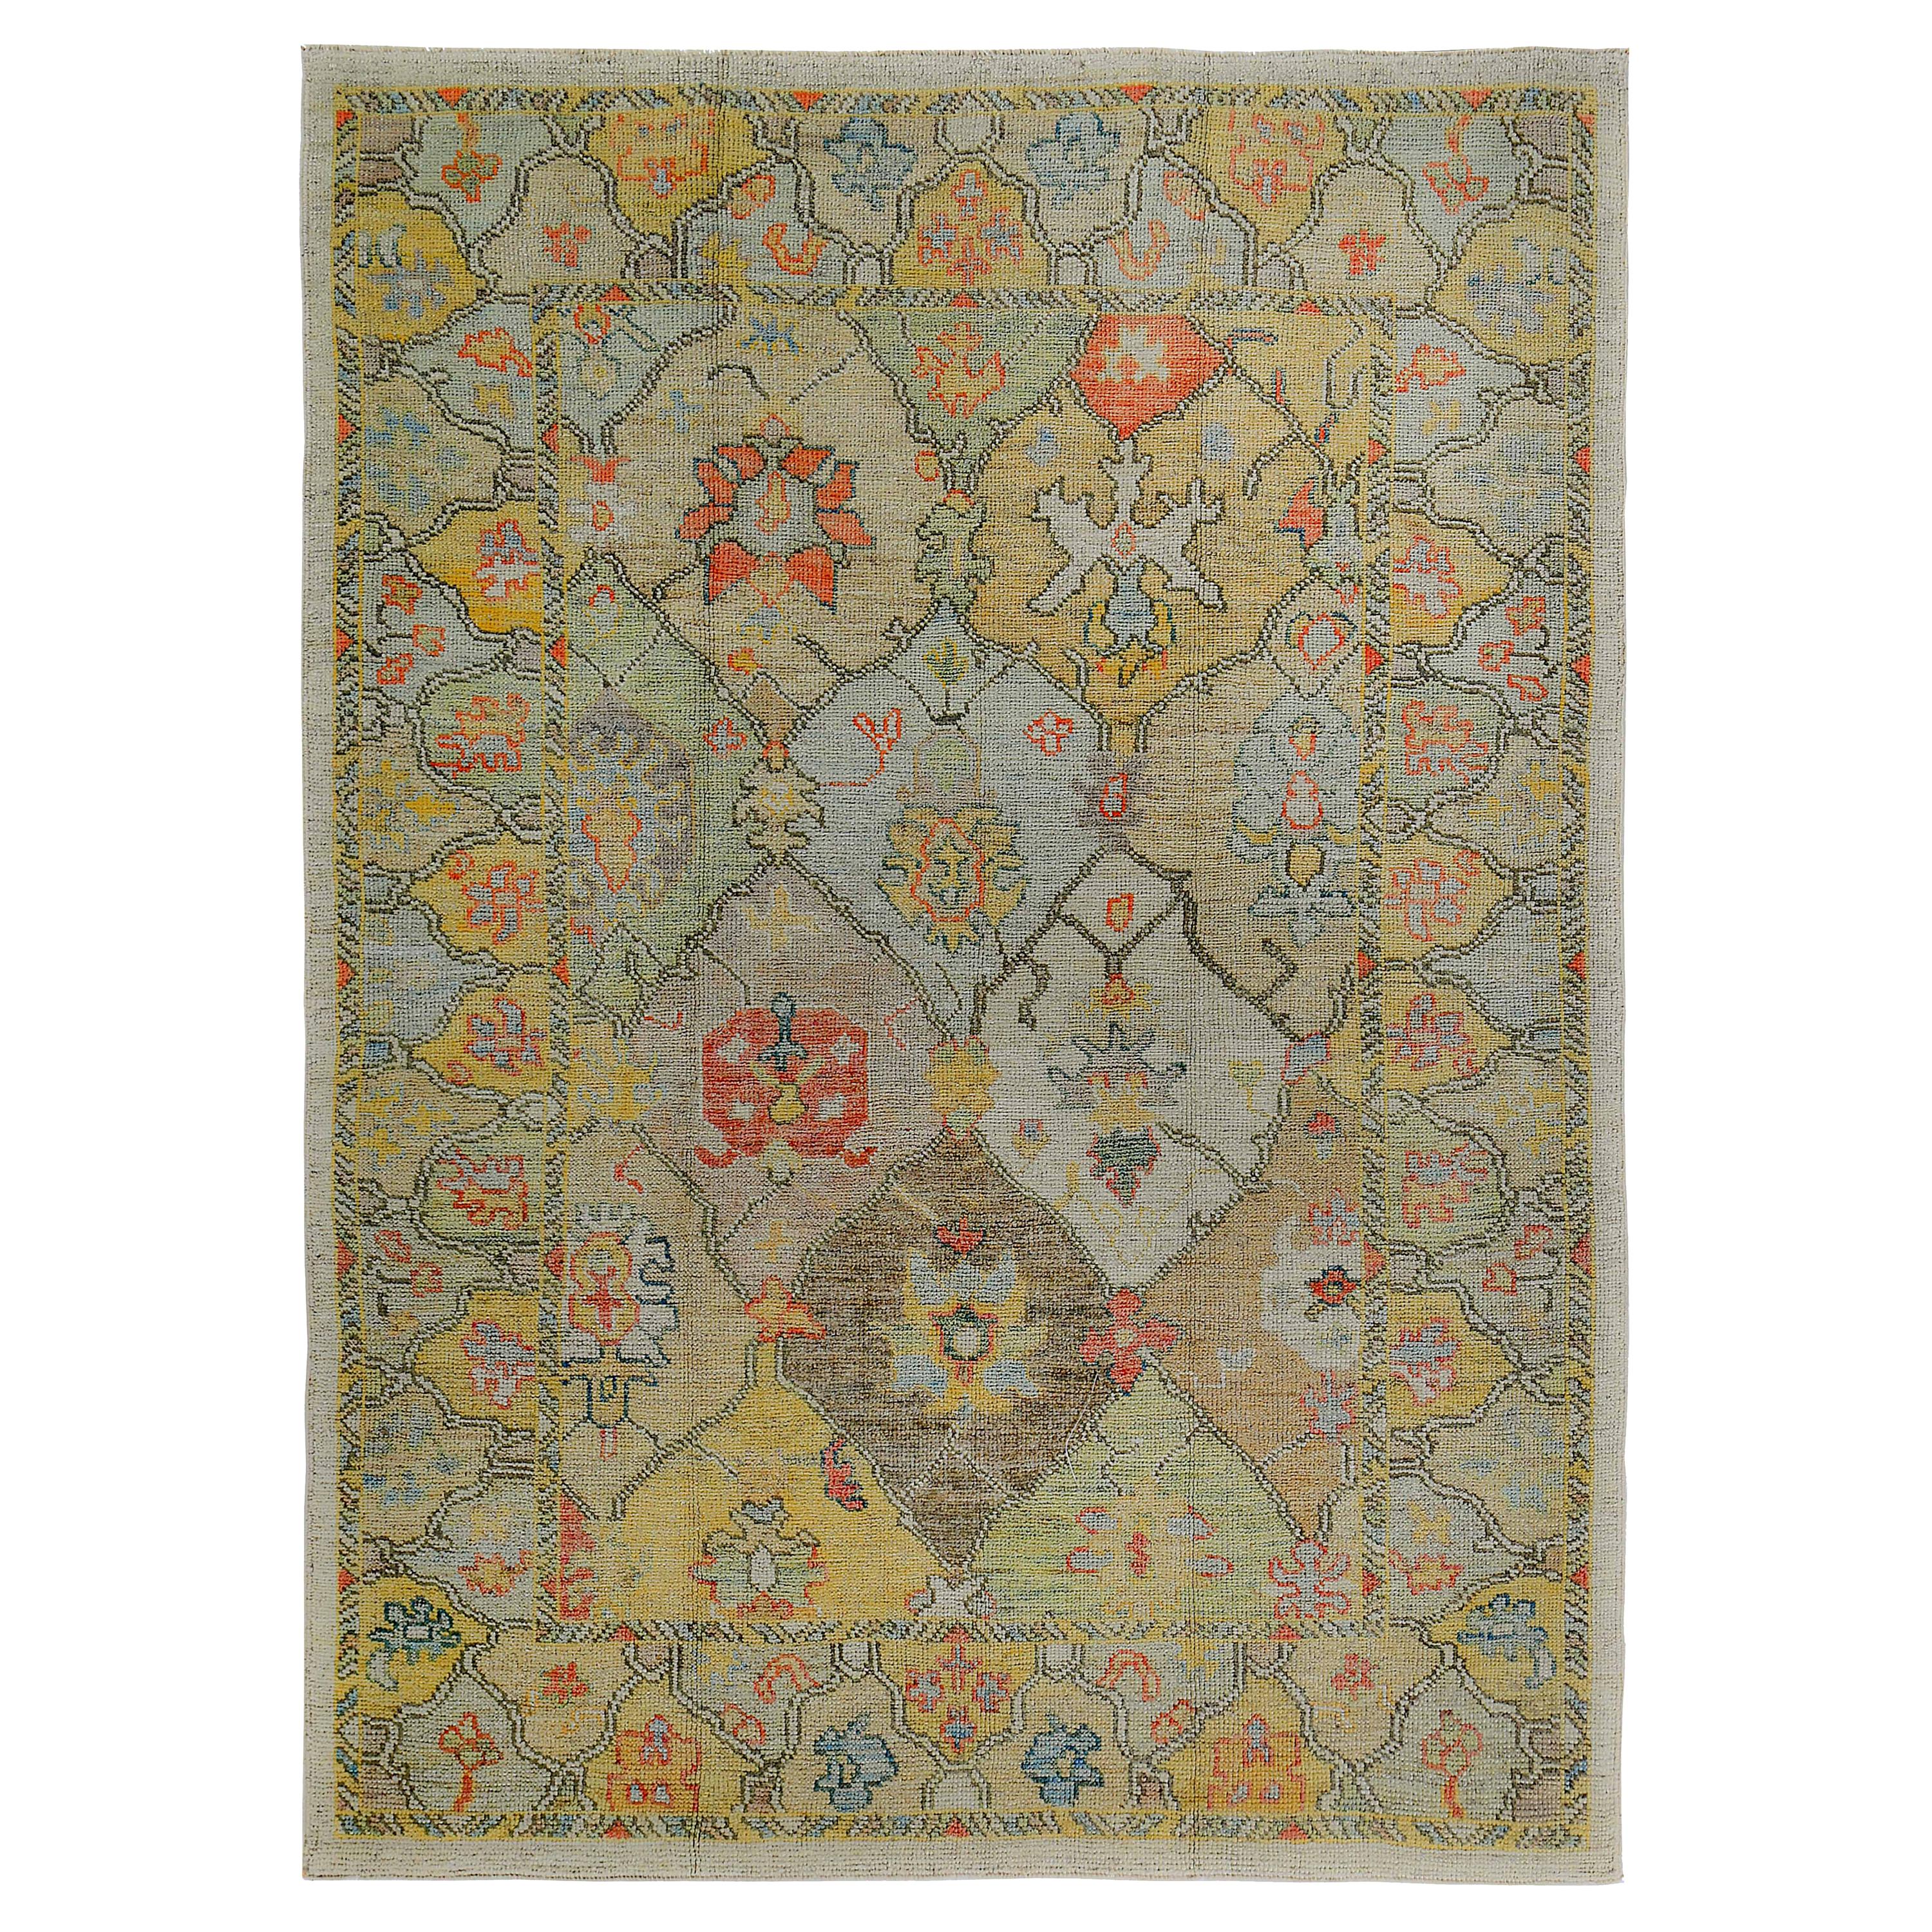 Turkish Oushak Rug with Orange and Yellow Floral Details on Ivory Field